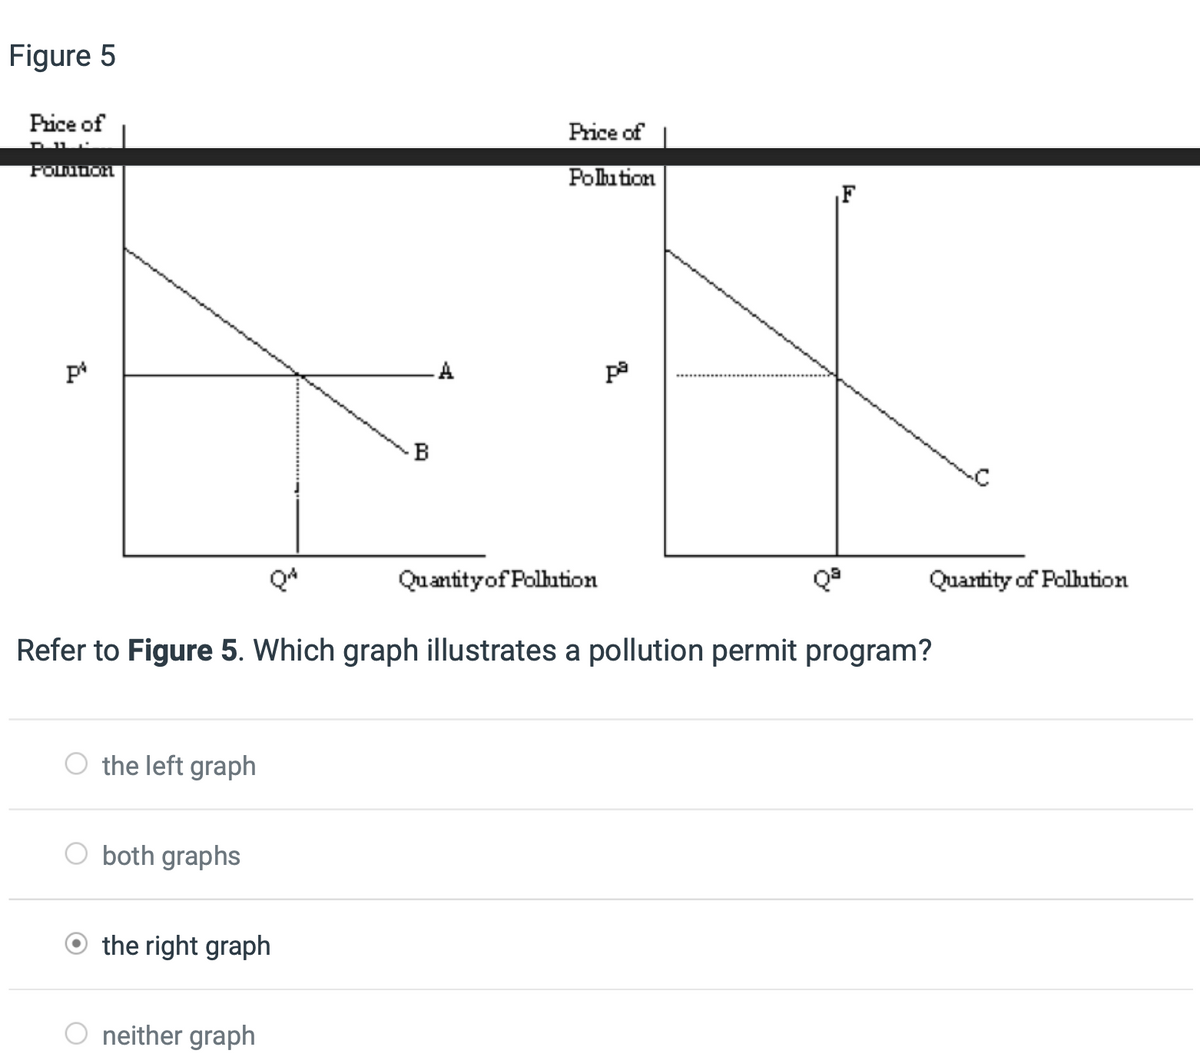 Figure 5
Price of
POLIDON
the left graph
both graphs
the right graph
B
neither graph
Price of
Pollution
Quantity of Pollution
2
Refer to Figure 5. Which graph illustrates a pollution permit program?
pa
Qª
Quantity of Pollution